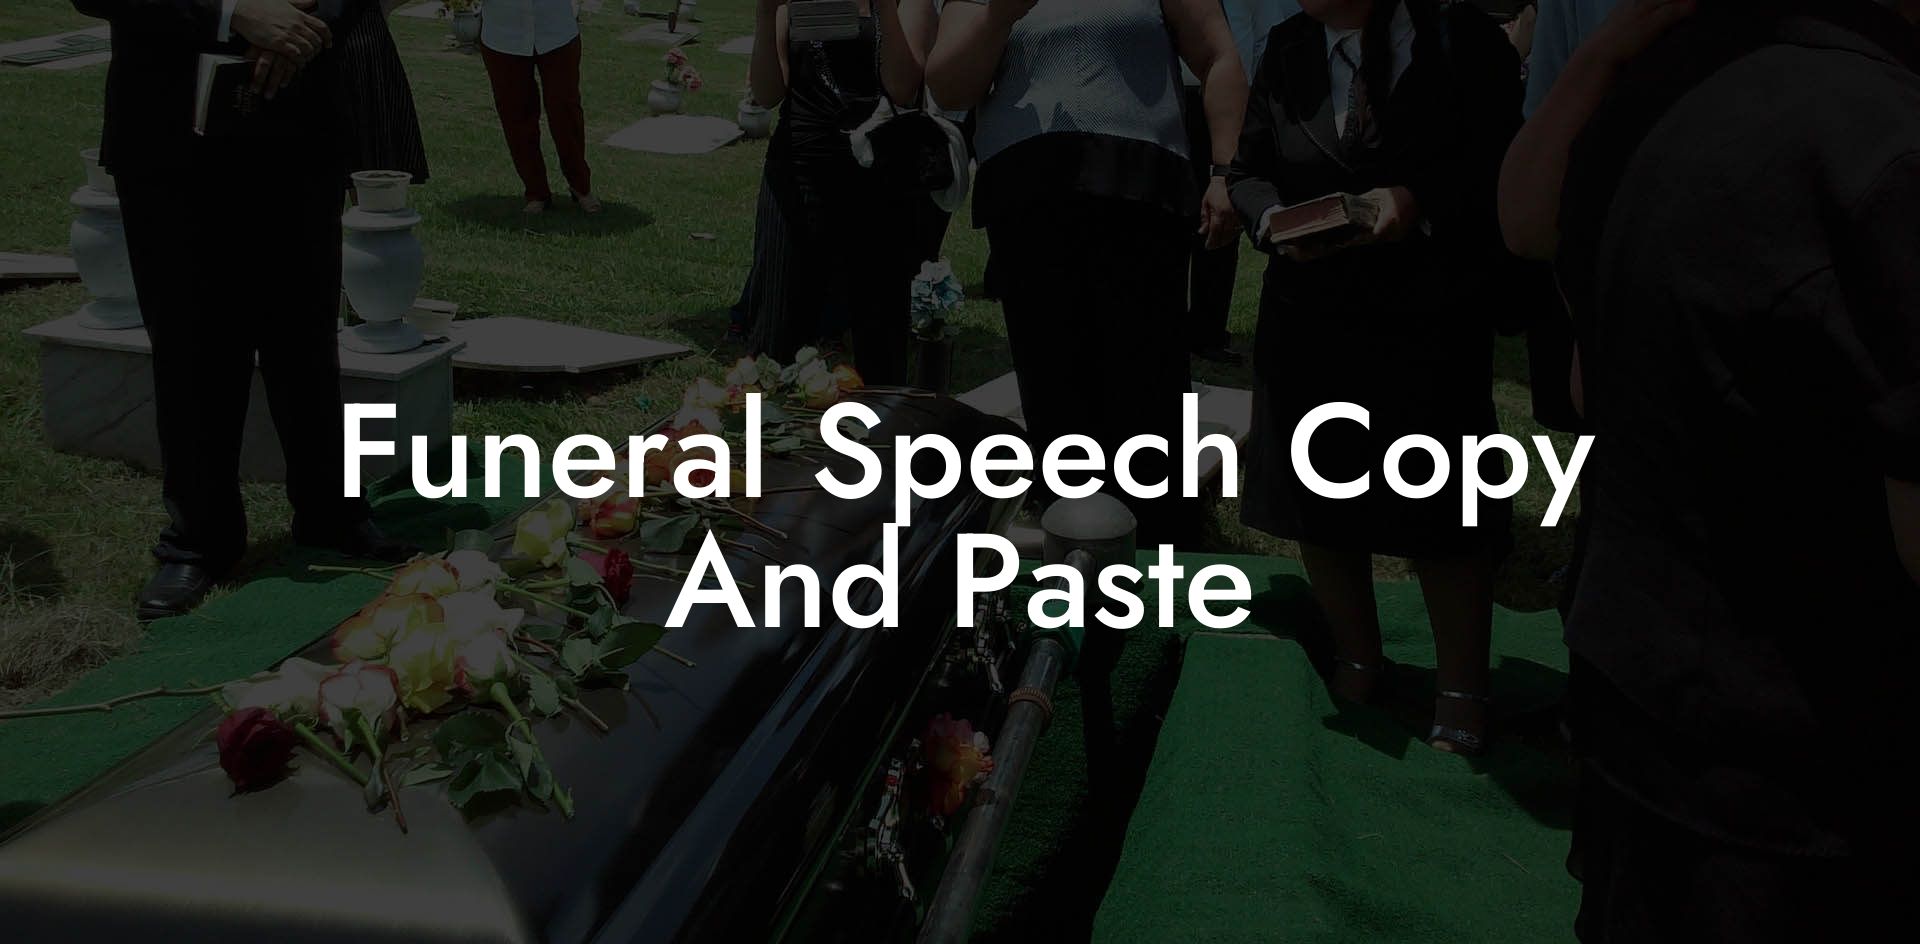 Funeral Speech Copy And Paste